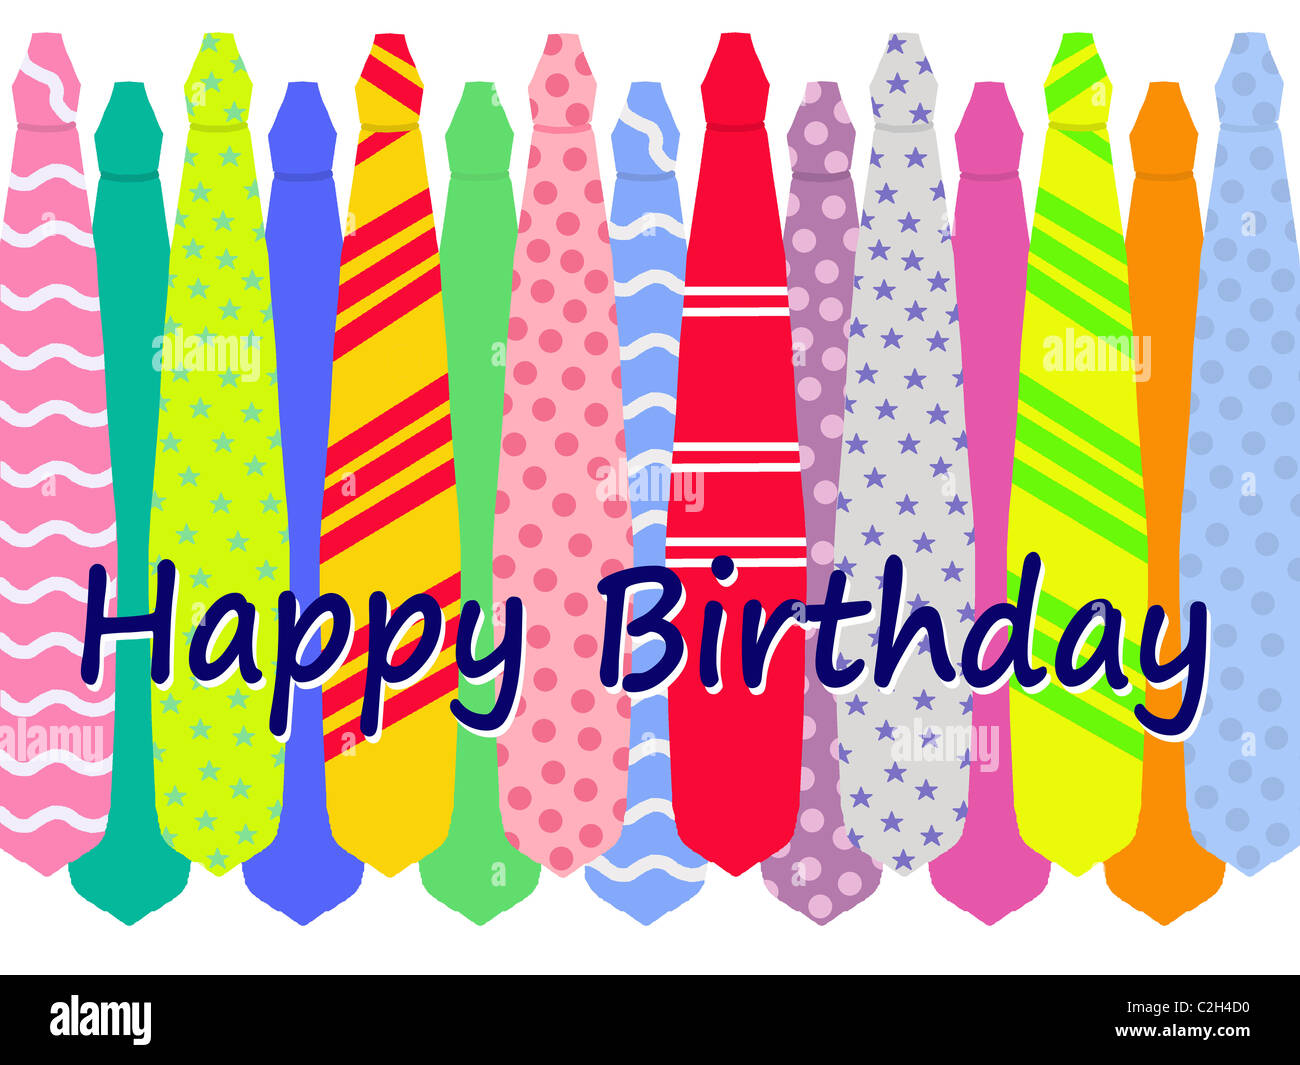 Pattern or wallpaper of colorful ties for a birthday card Stock Photo